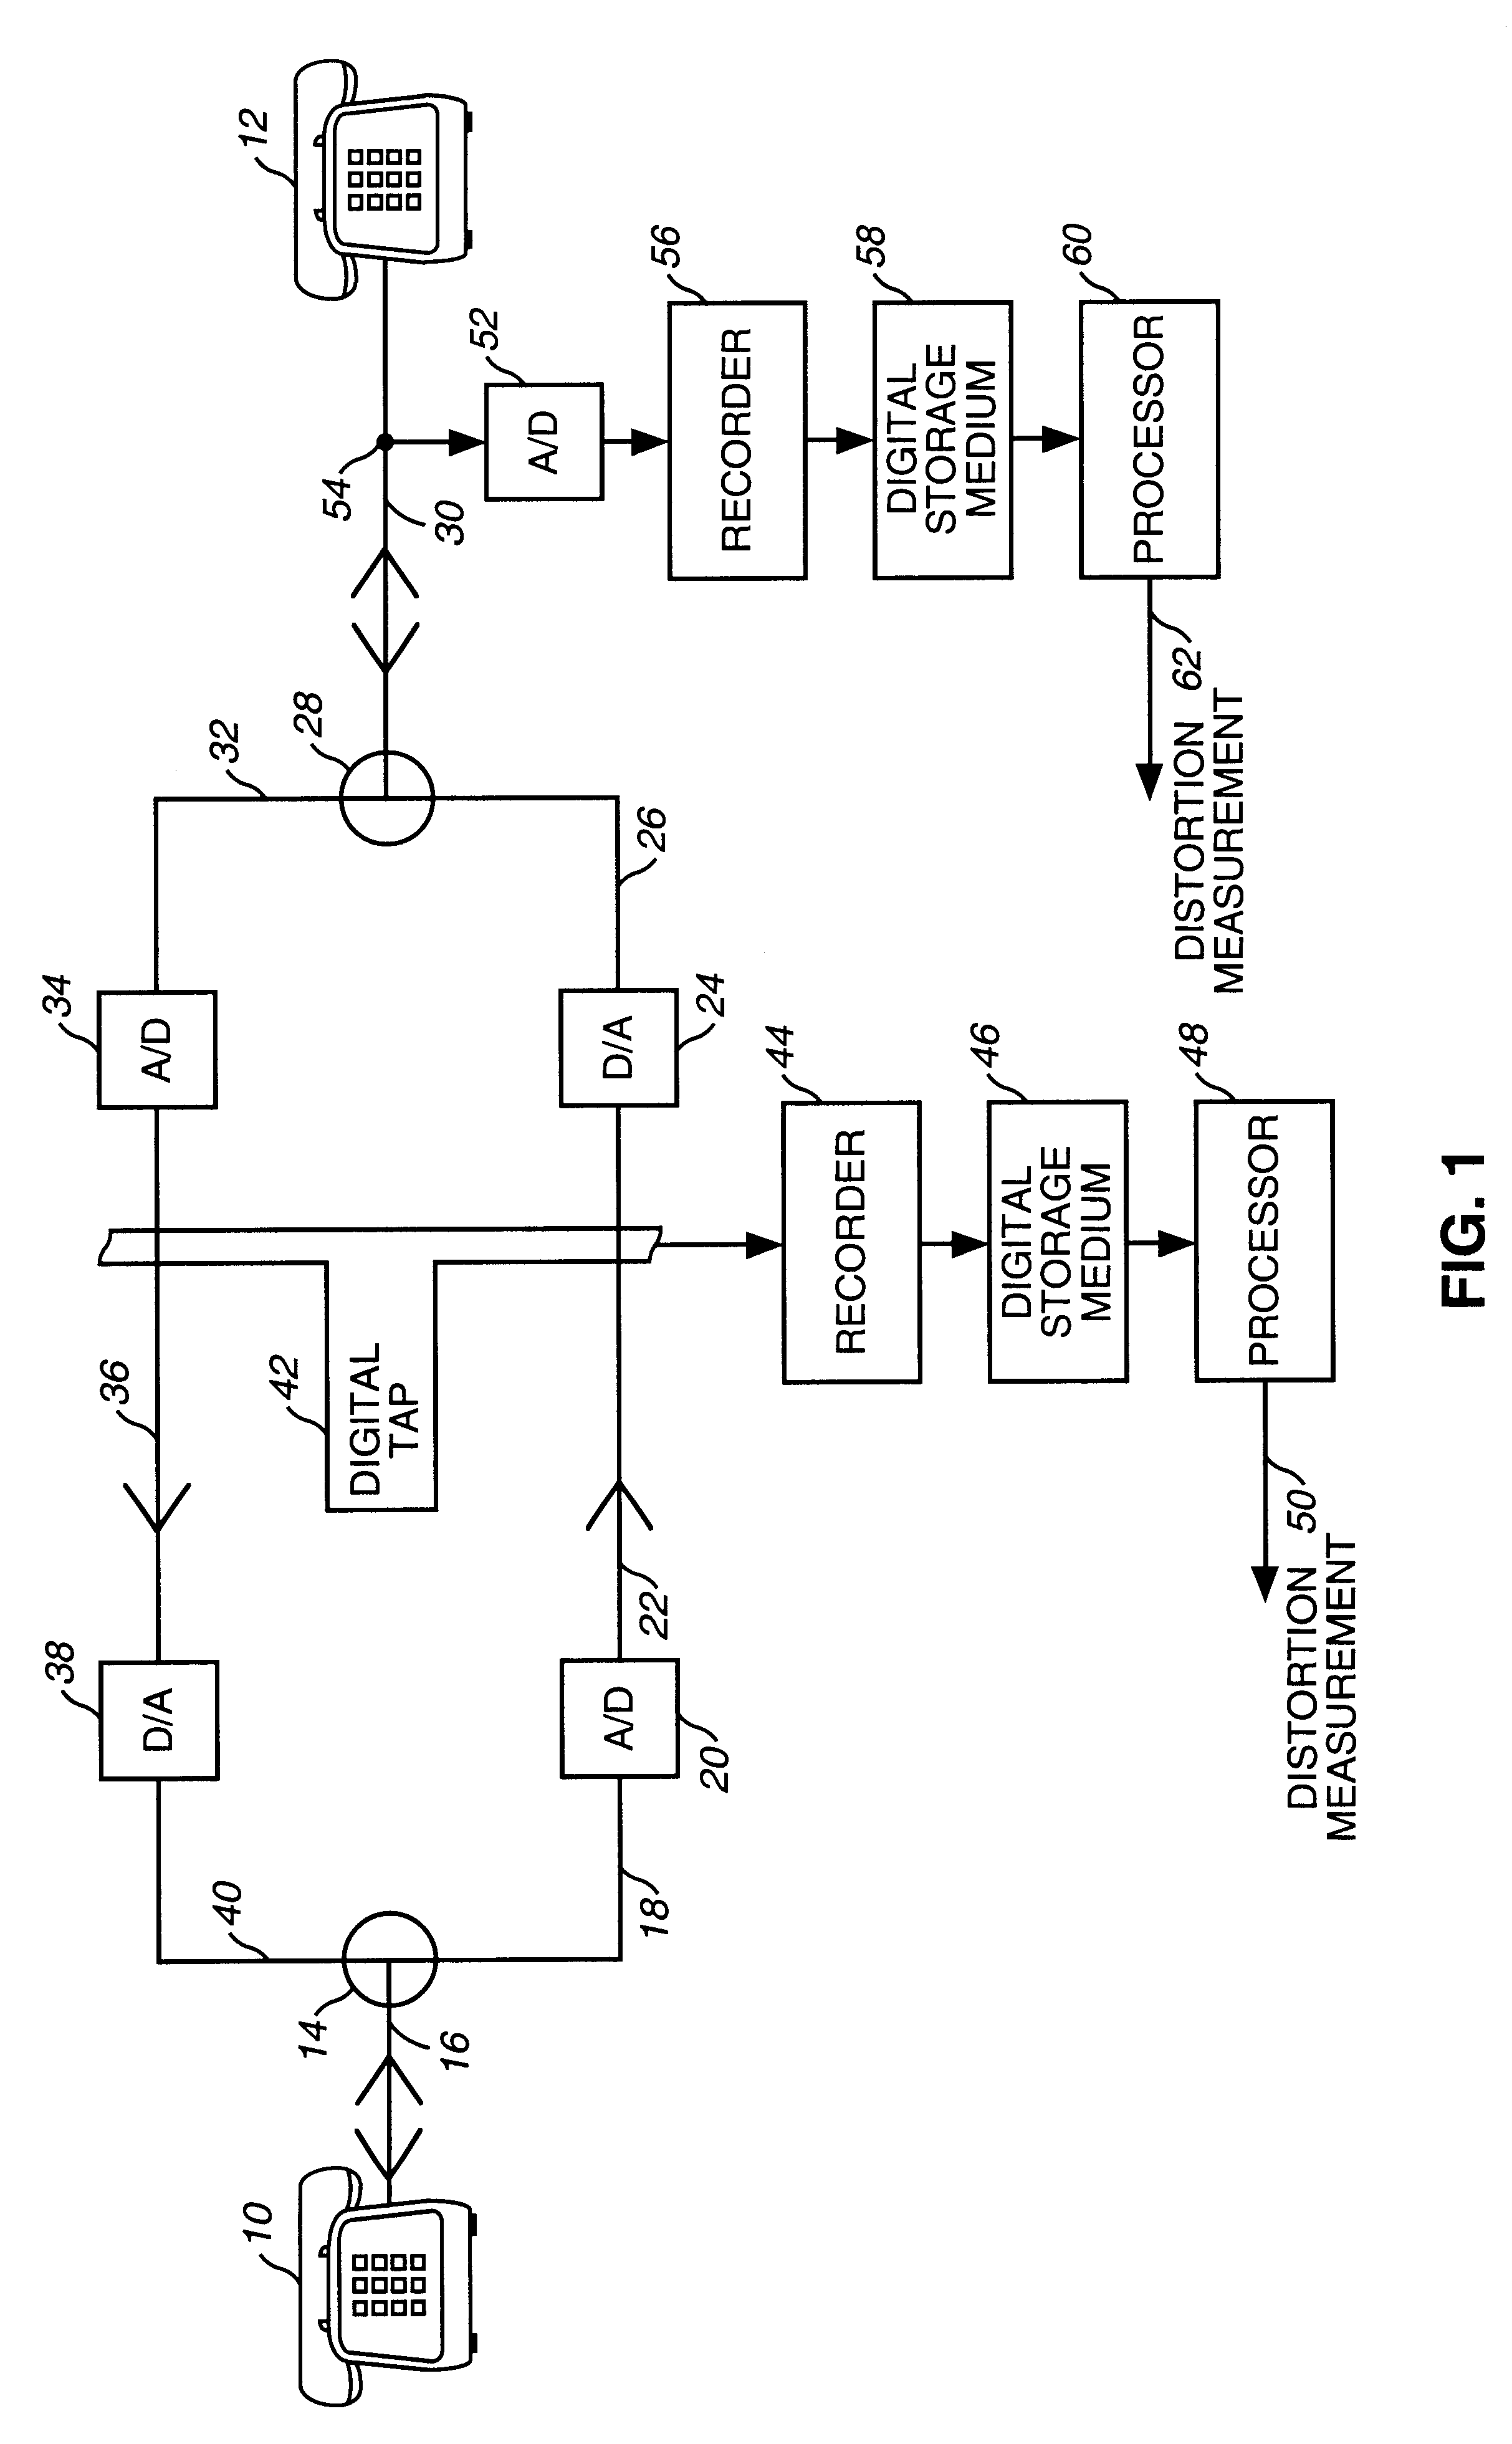 Method and system for measurement of speech distortion from samples of telephonic voice signals